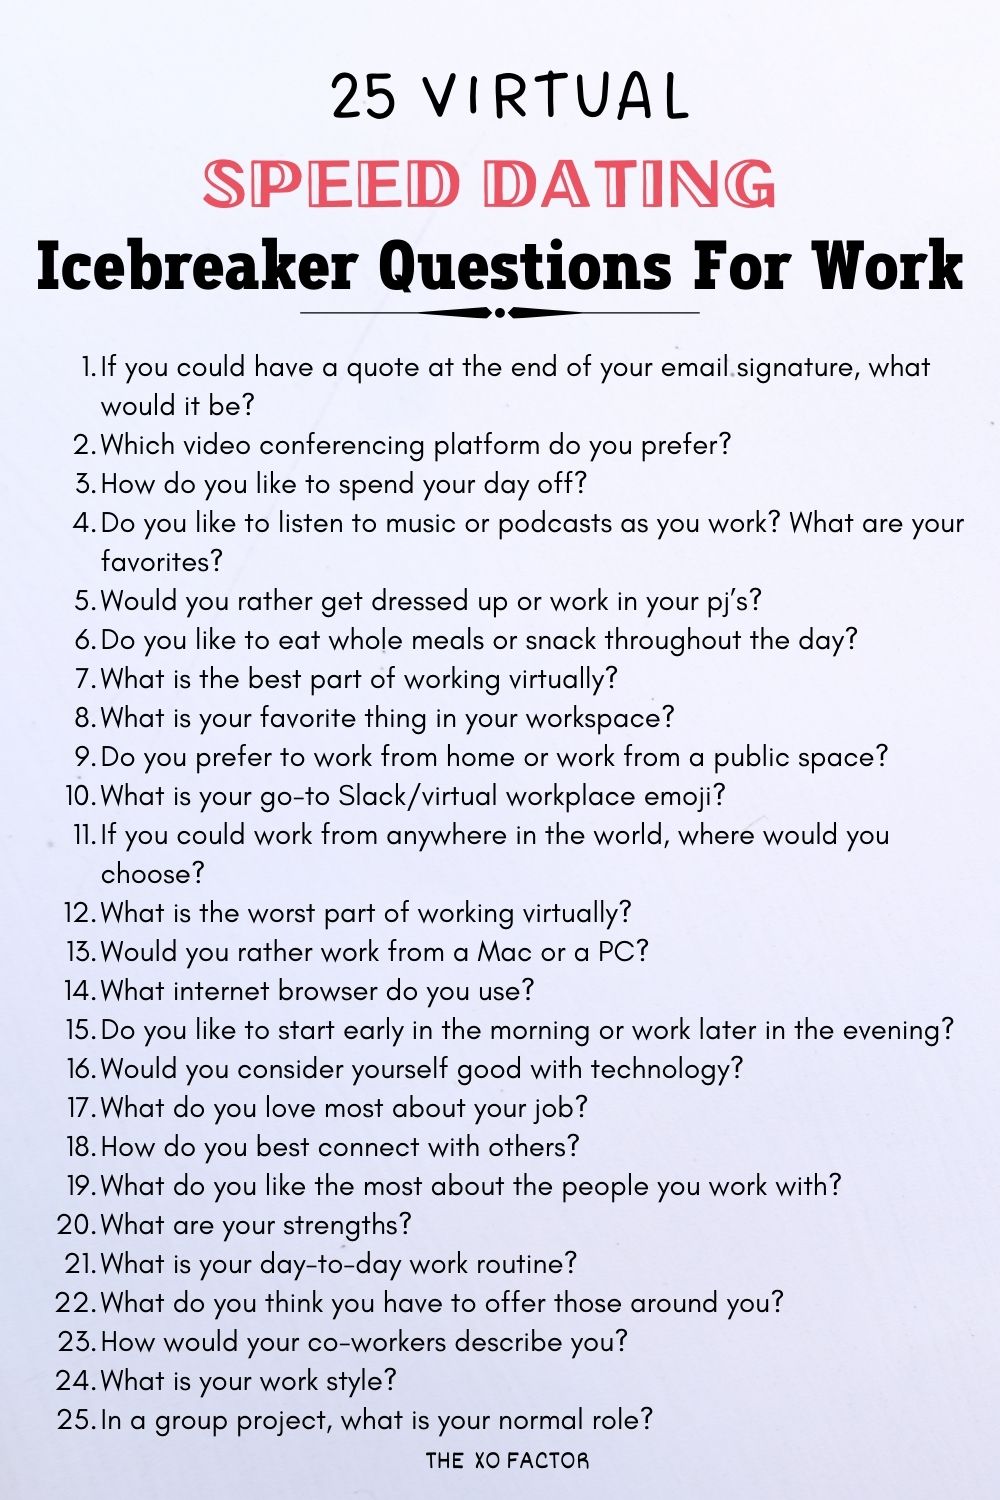 Virtual Speed Dating Icebreaker Questions For Work